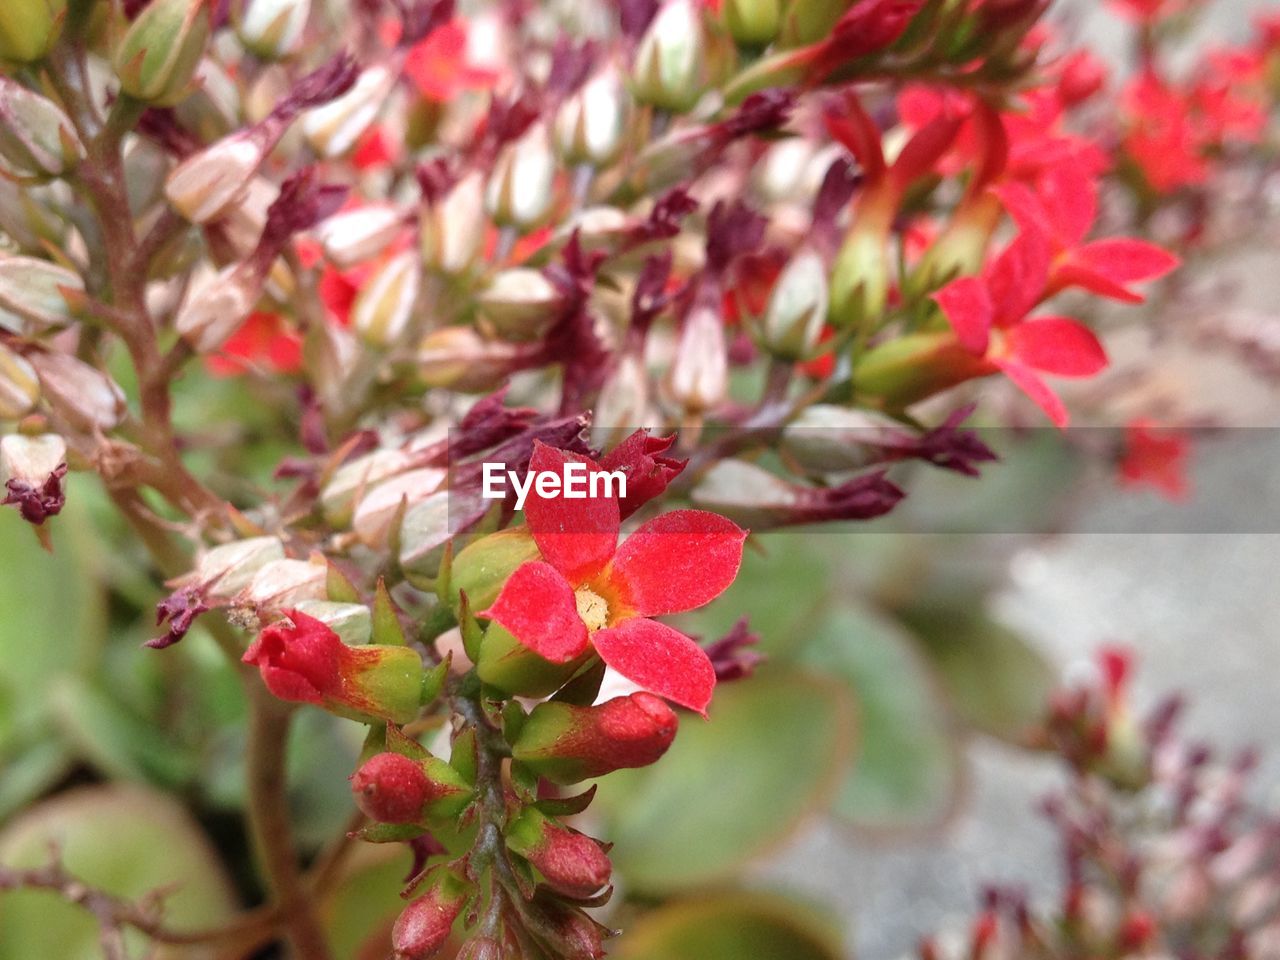 CLOSE-UP OF RED FLOWERING PLANT AGAINST TREE